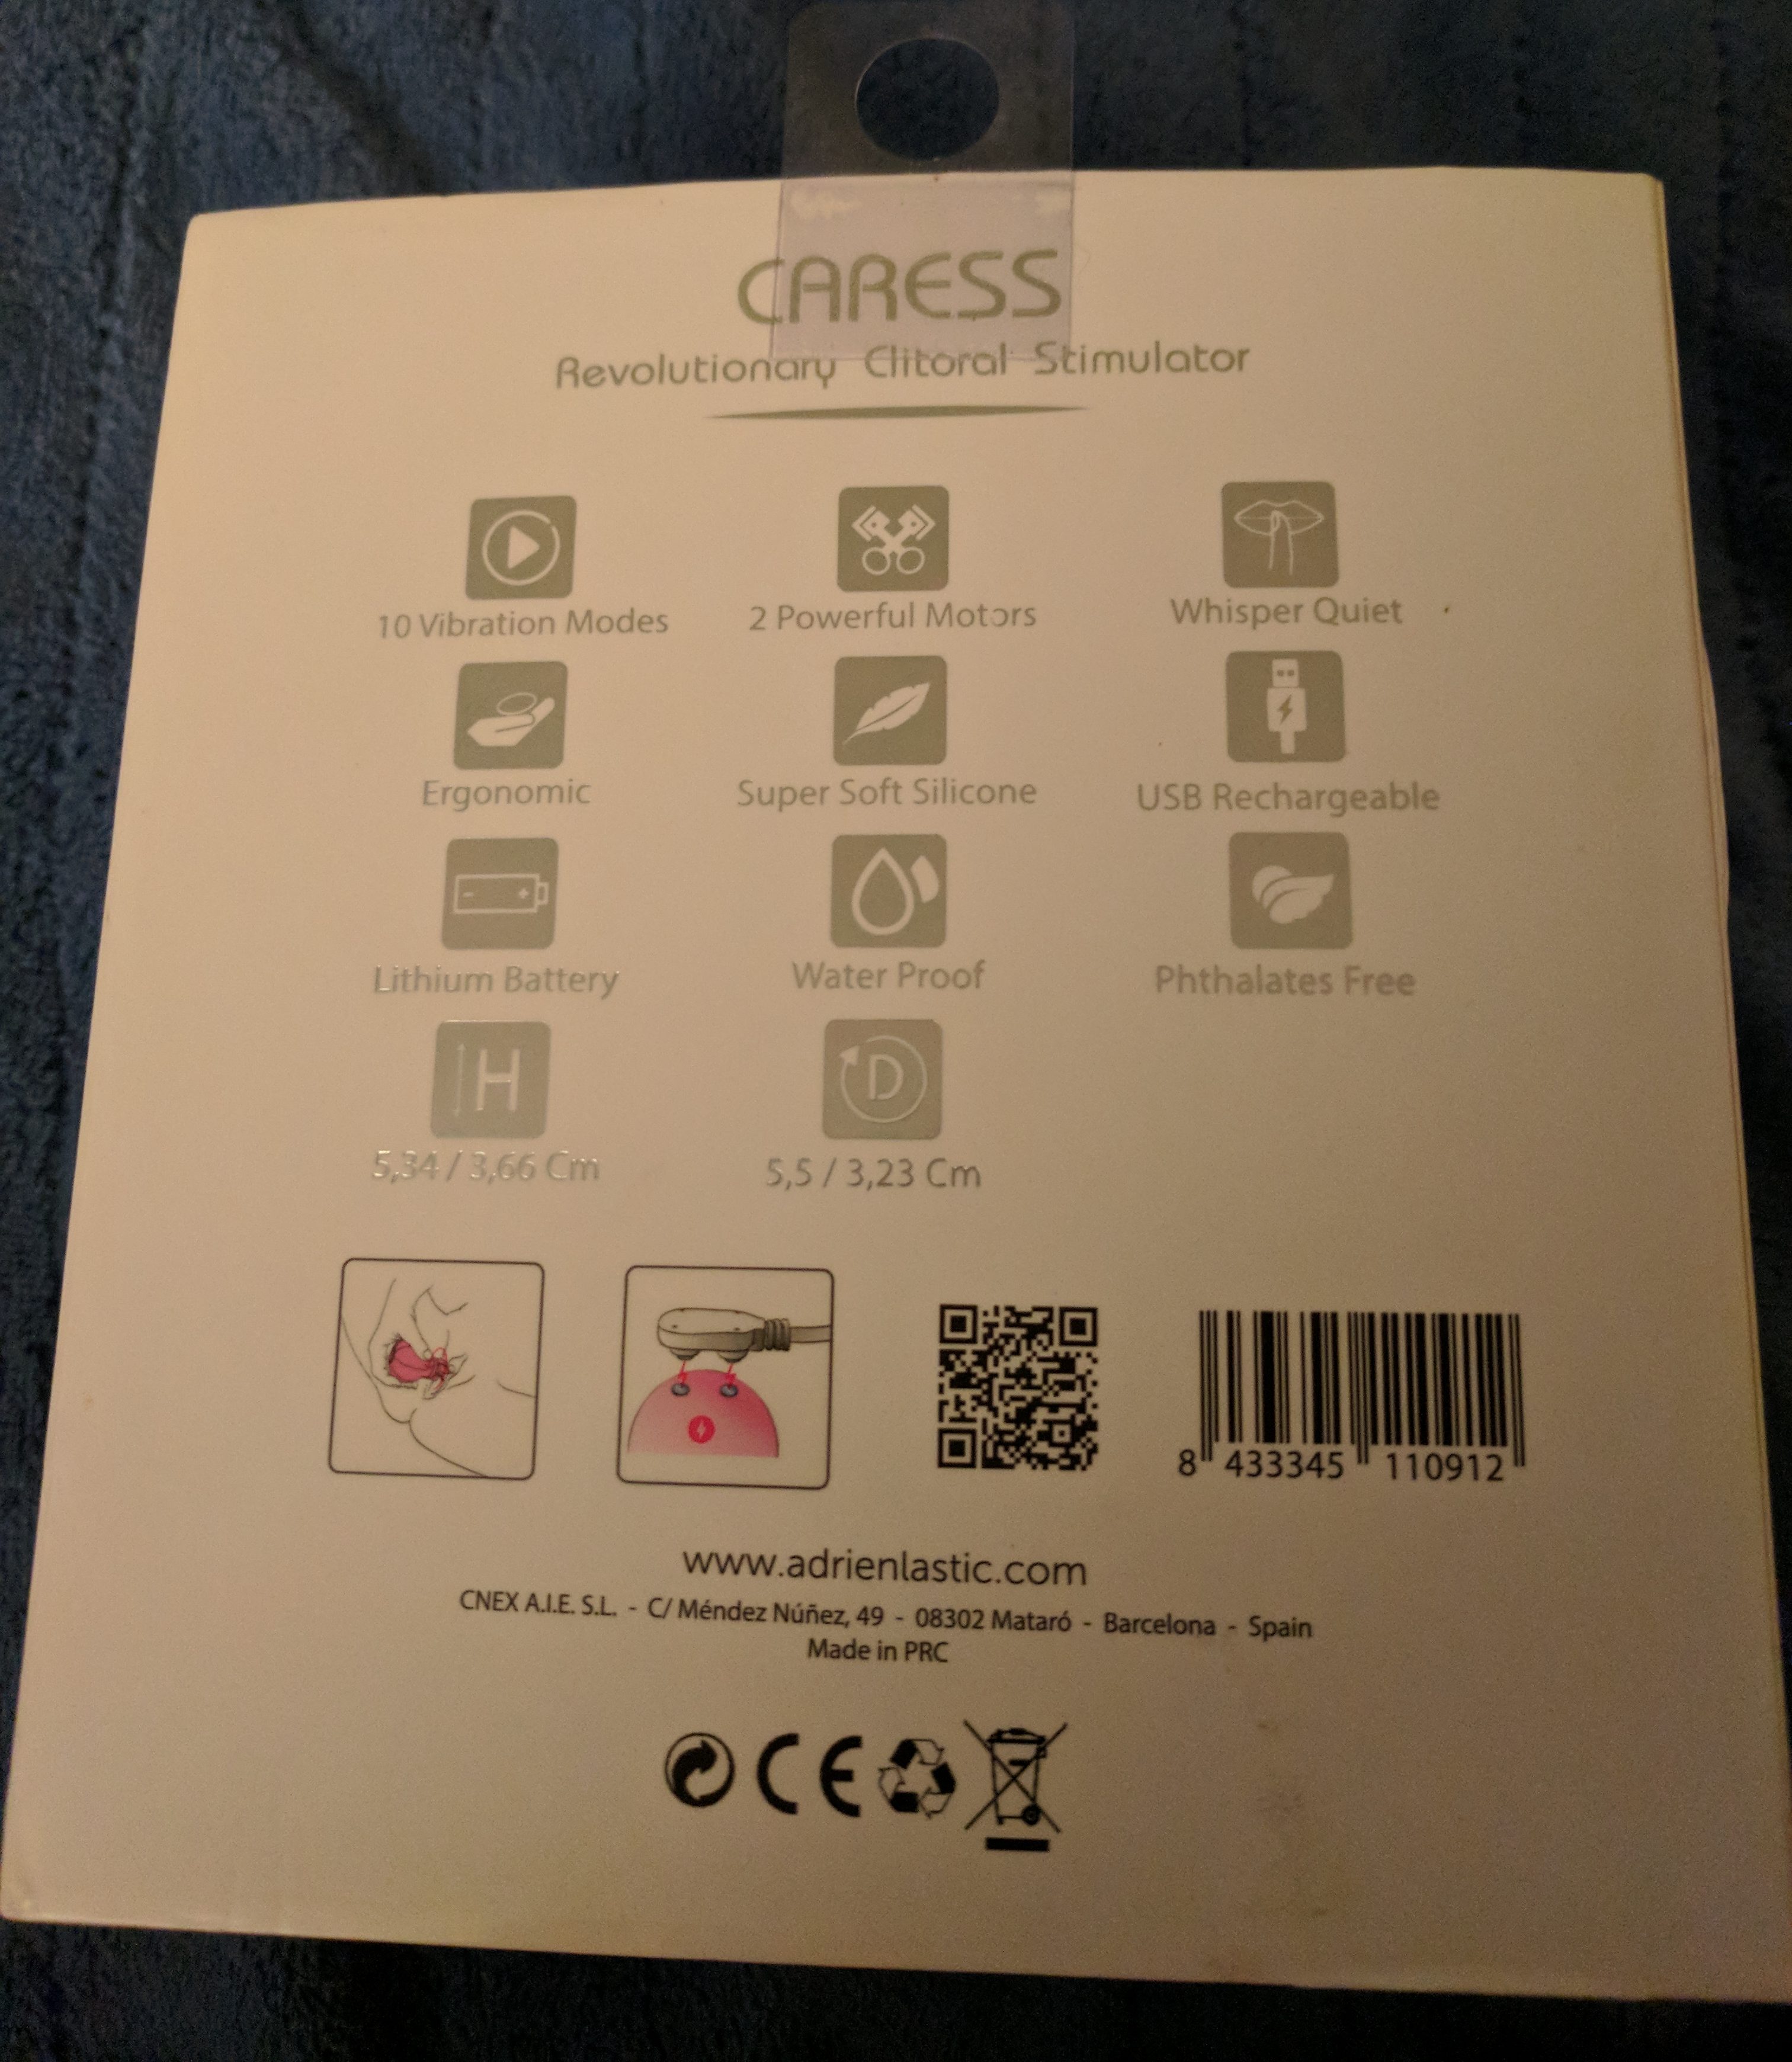 Caress back of box, explaining all its features